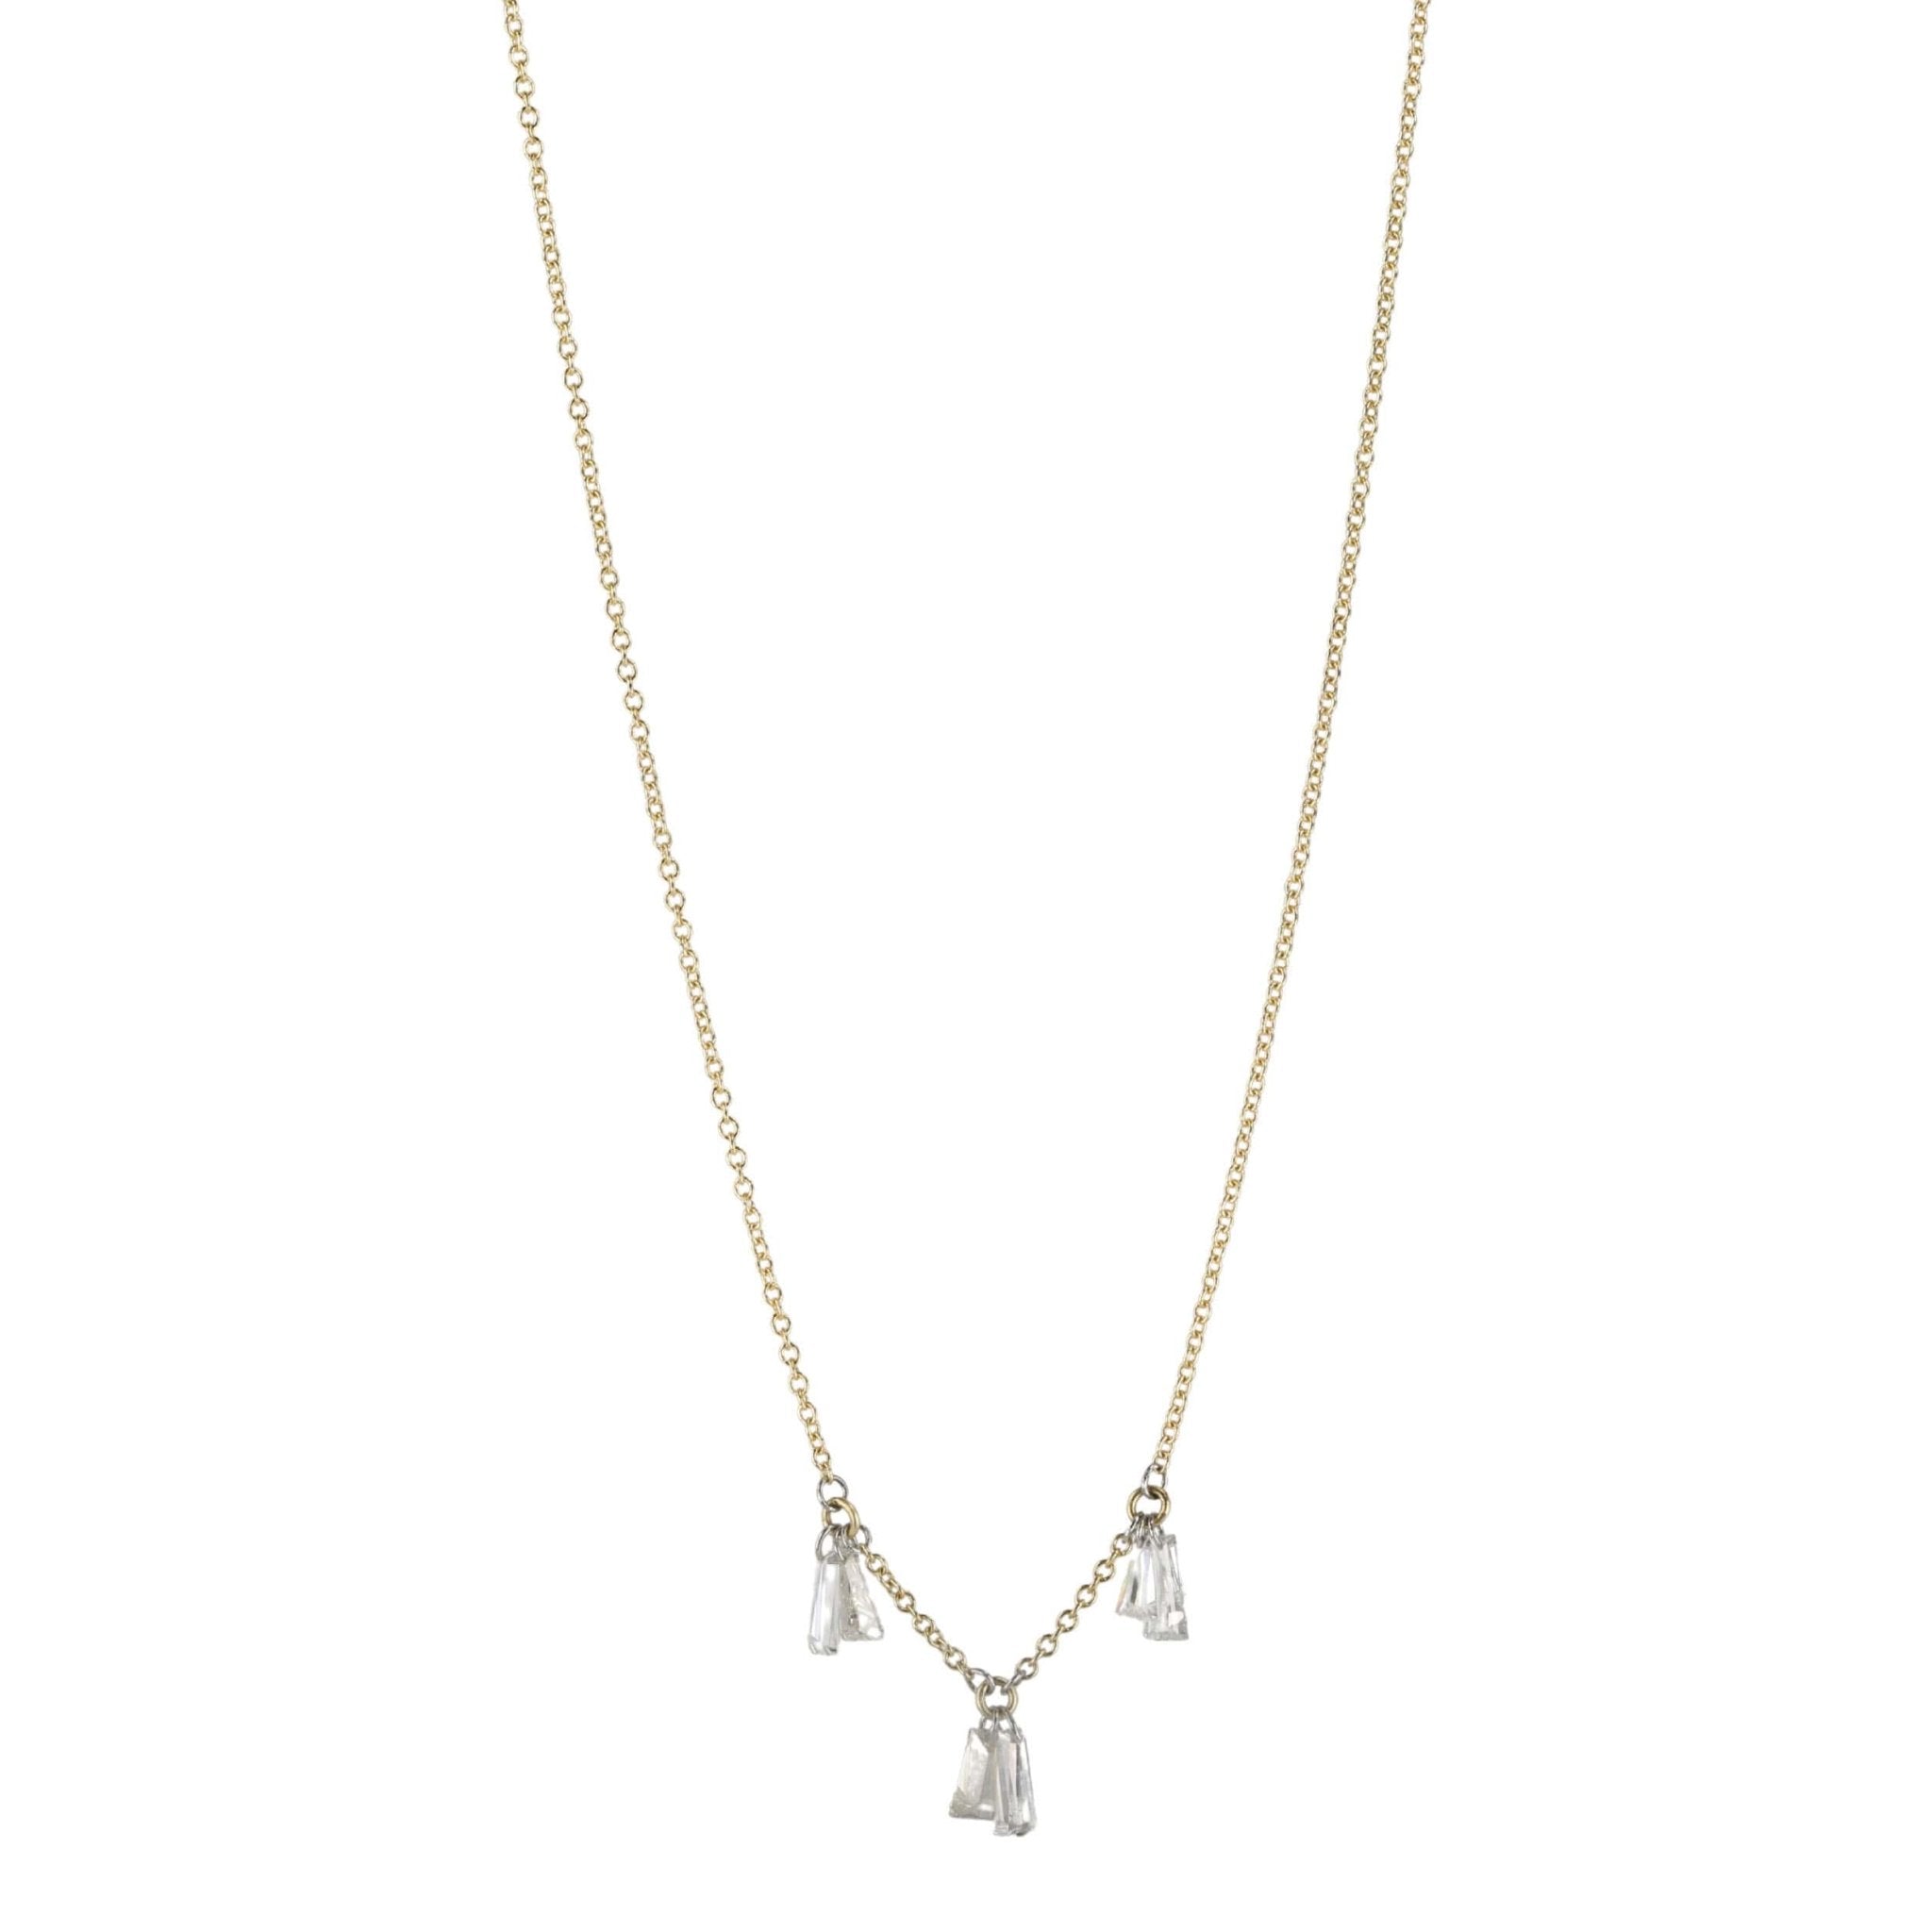 TAP by Todd Pownell 18K Gold Necklace with Six Baguette Diamonds